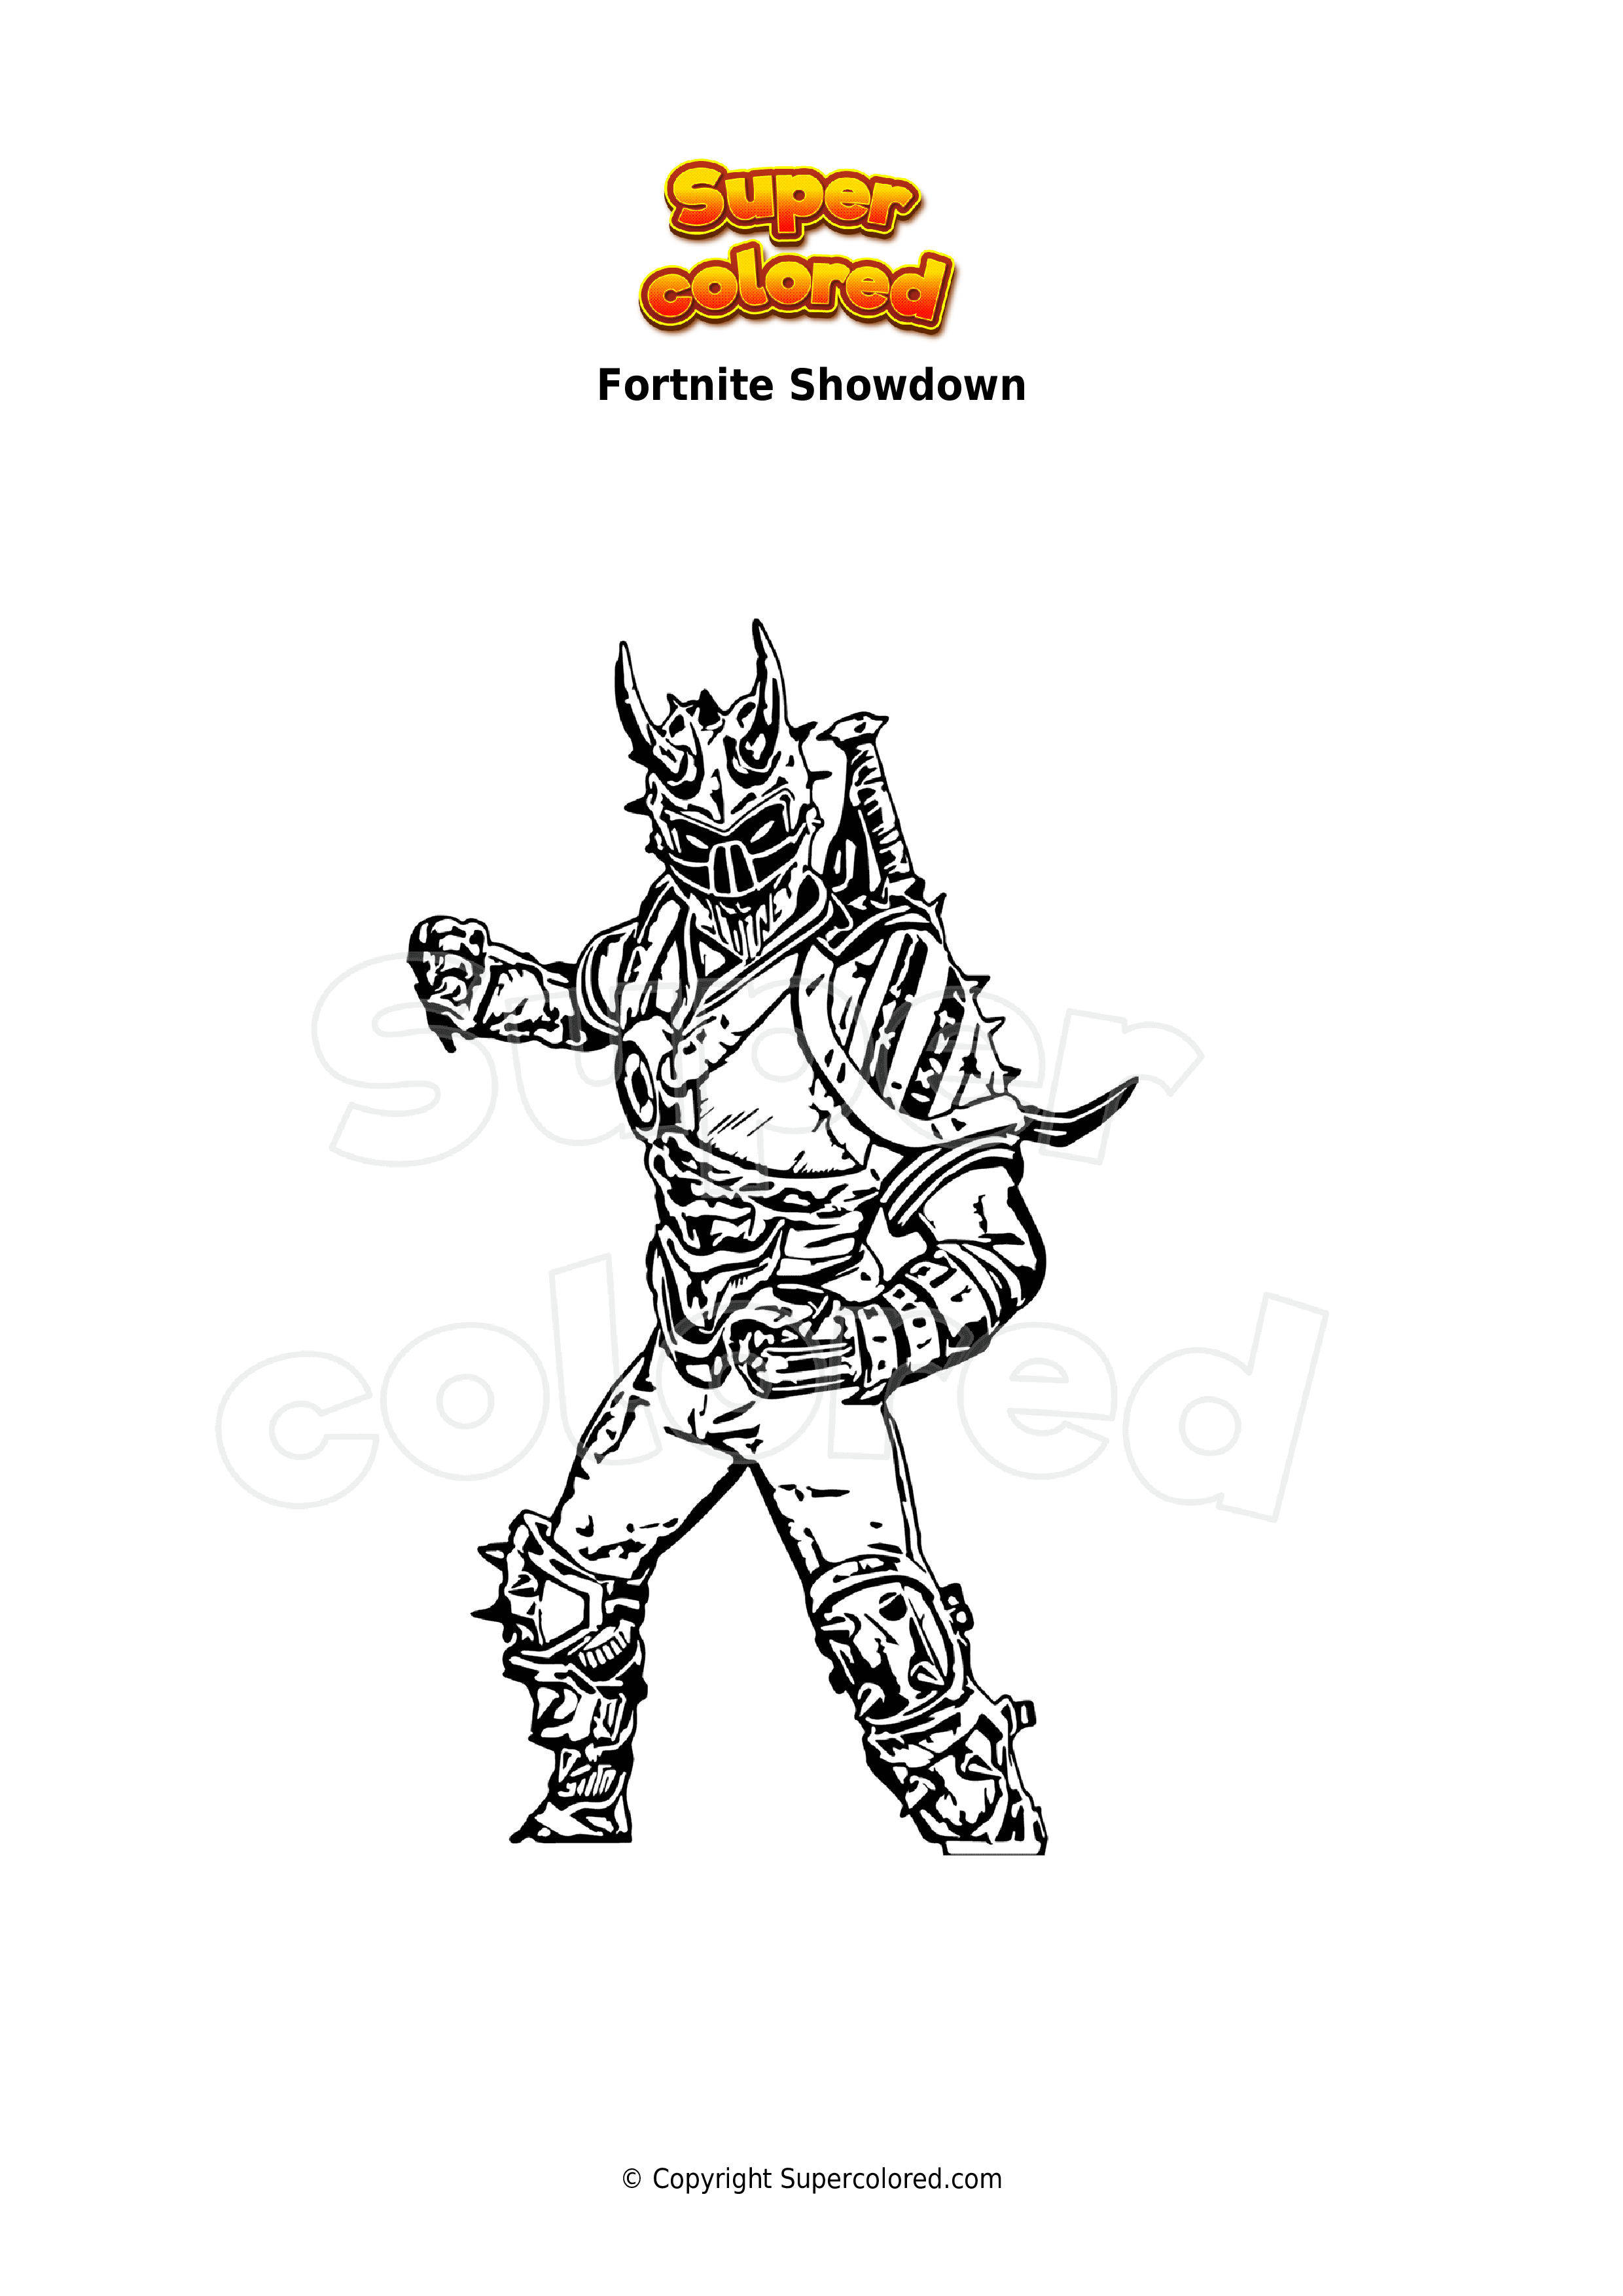 Coloring page Fortnite Ruby Shadows - Supercolored.com